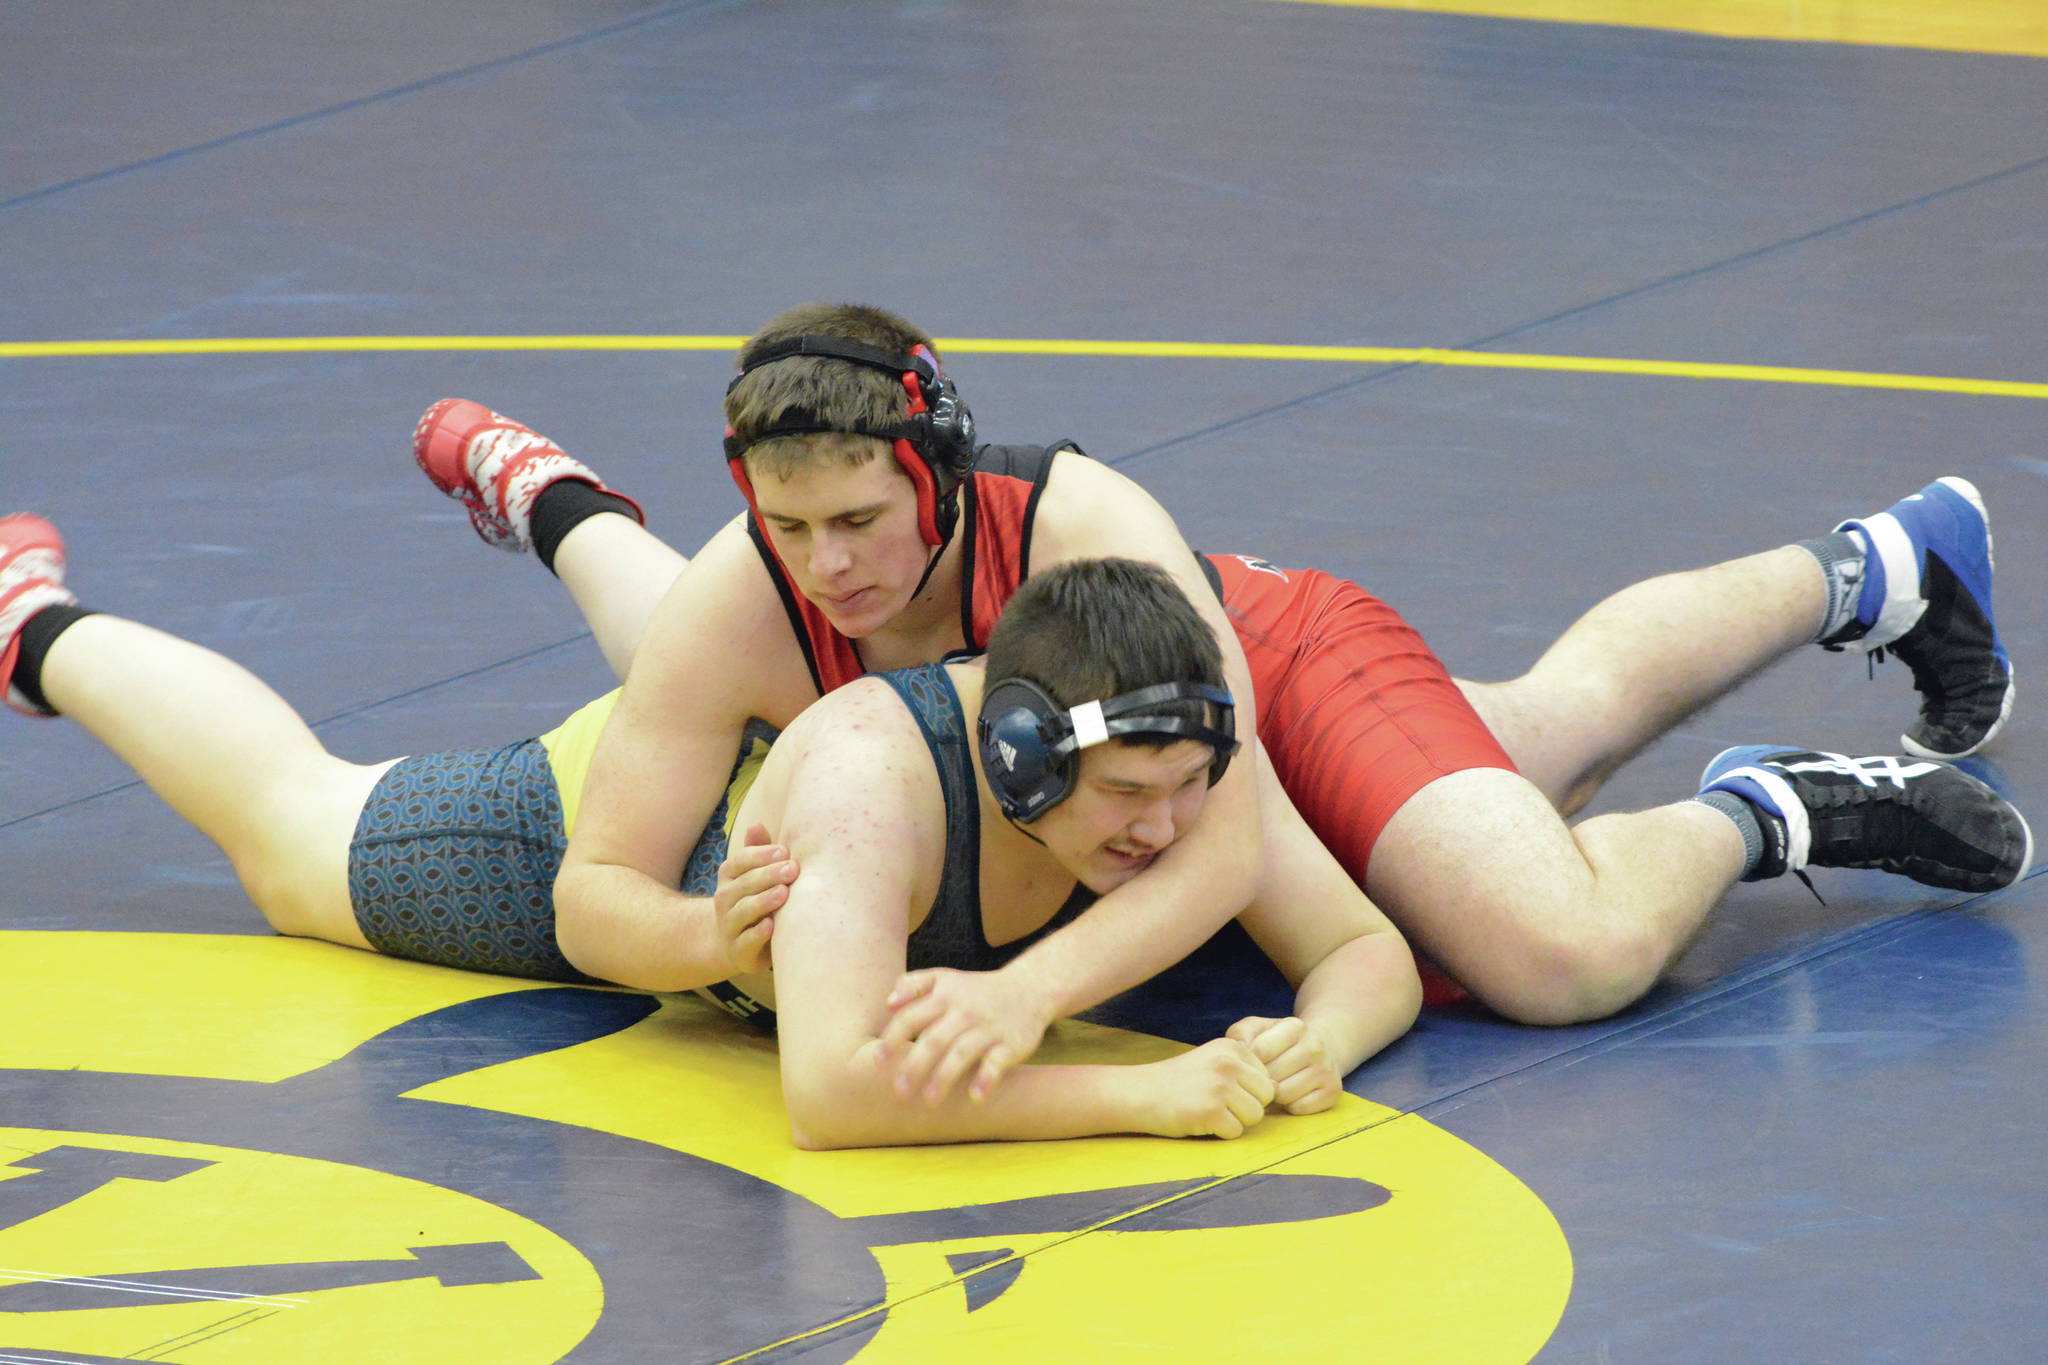 Kardinal Morgan Starks, tops, wrestles Mariner Bruce Graham, bottom, in a meet on Tuesday, April 6, 2021, in the Alice Witte Gym at Homer High School in Homer, Alaska. (Photo by Michael Armstrong/Homer News)